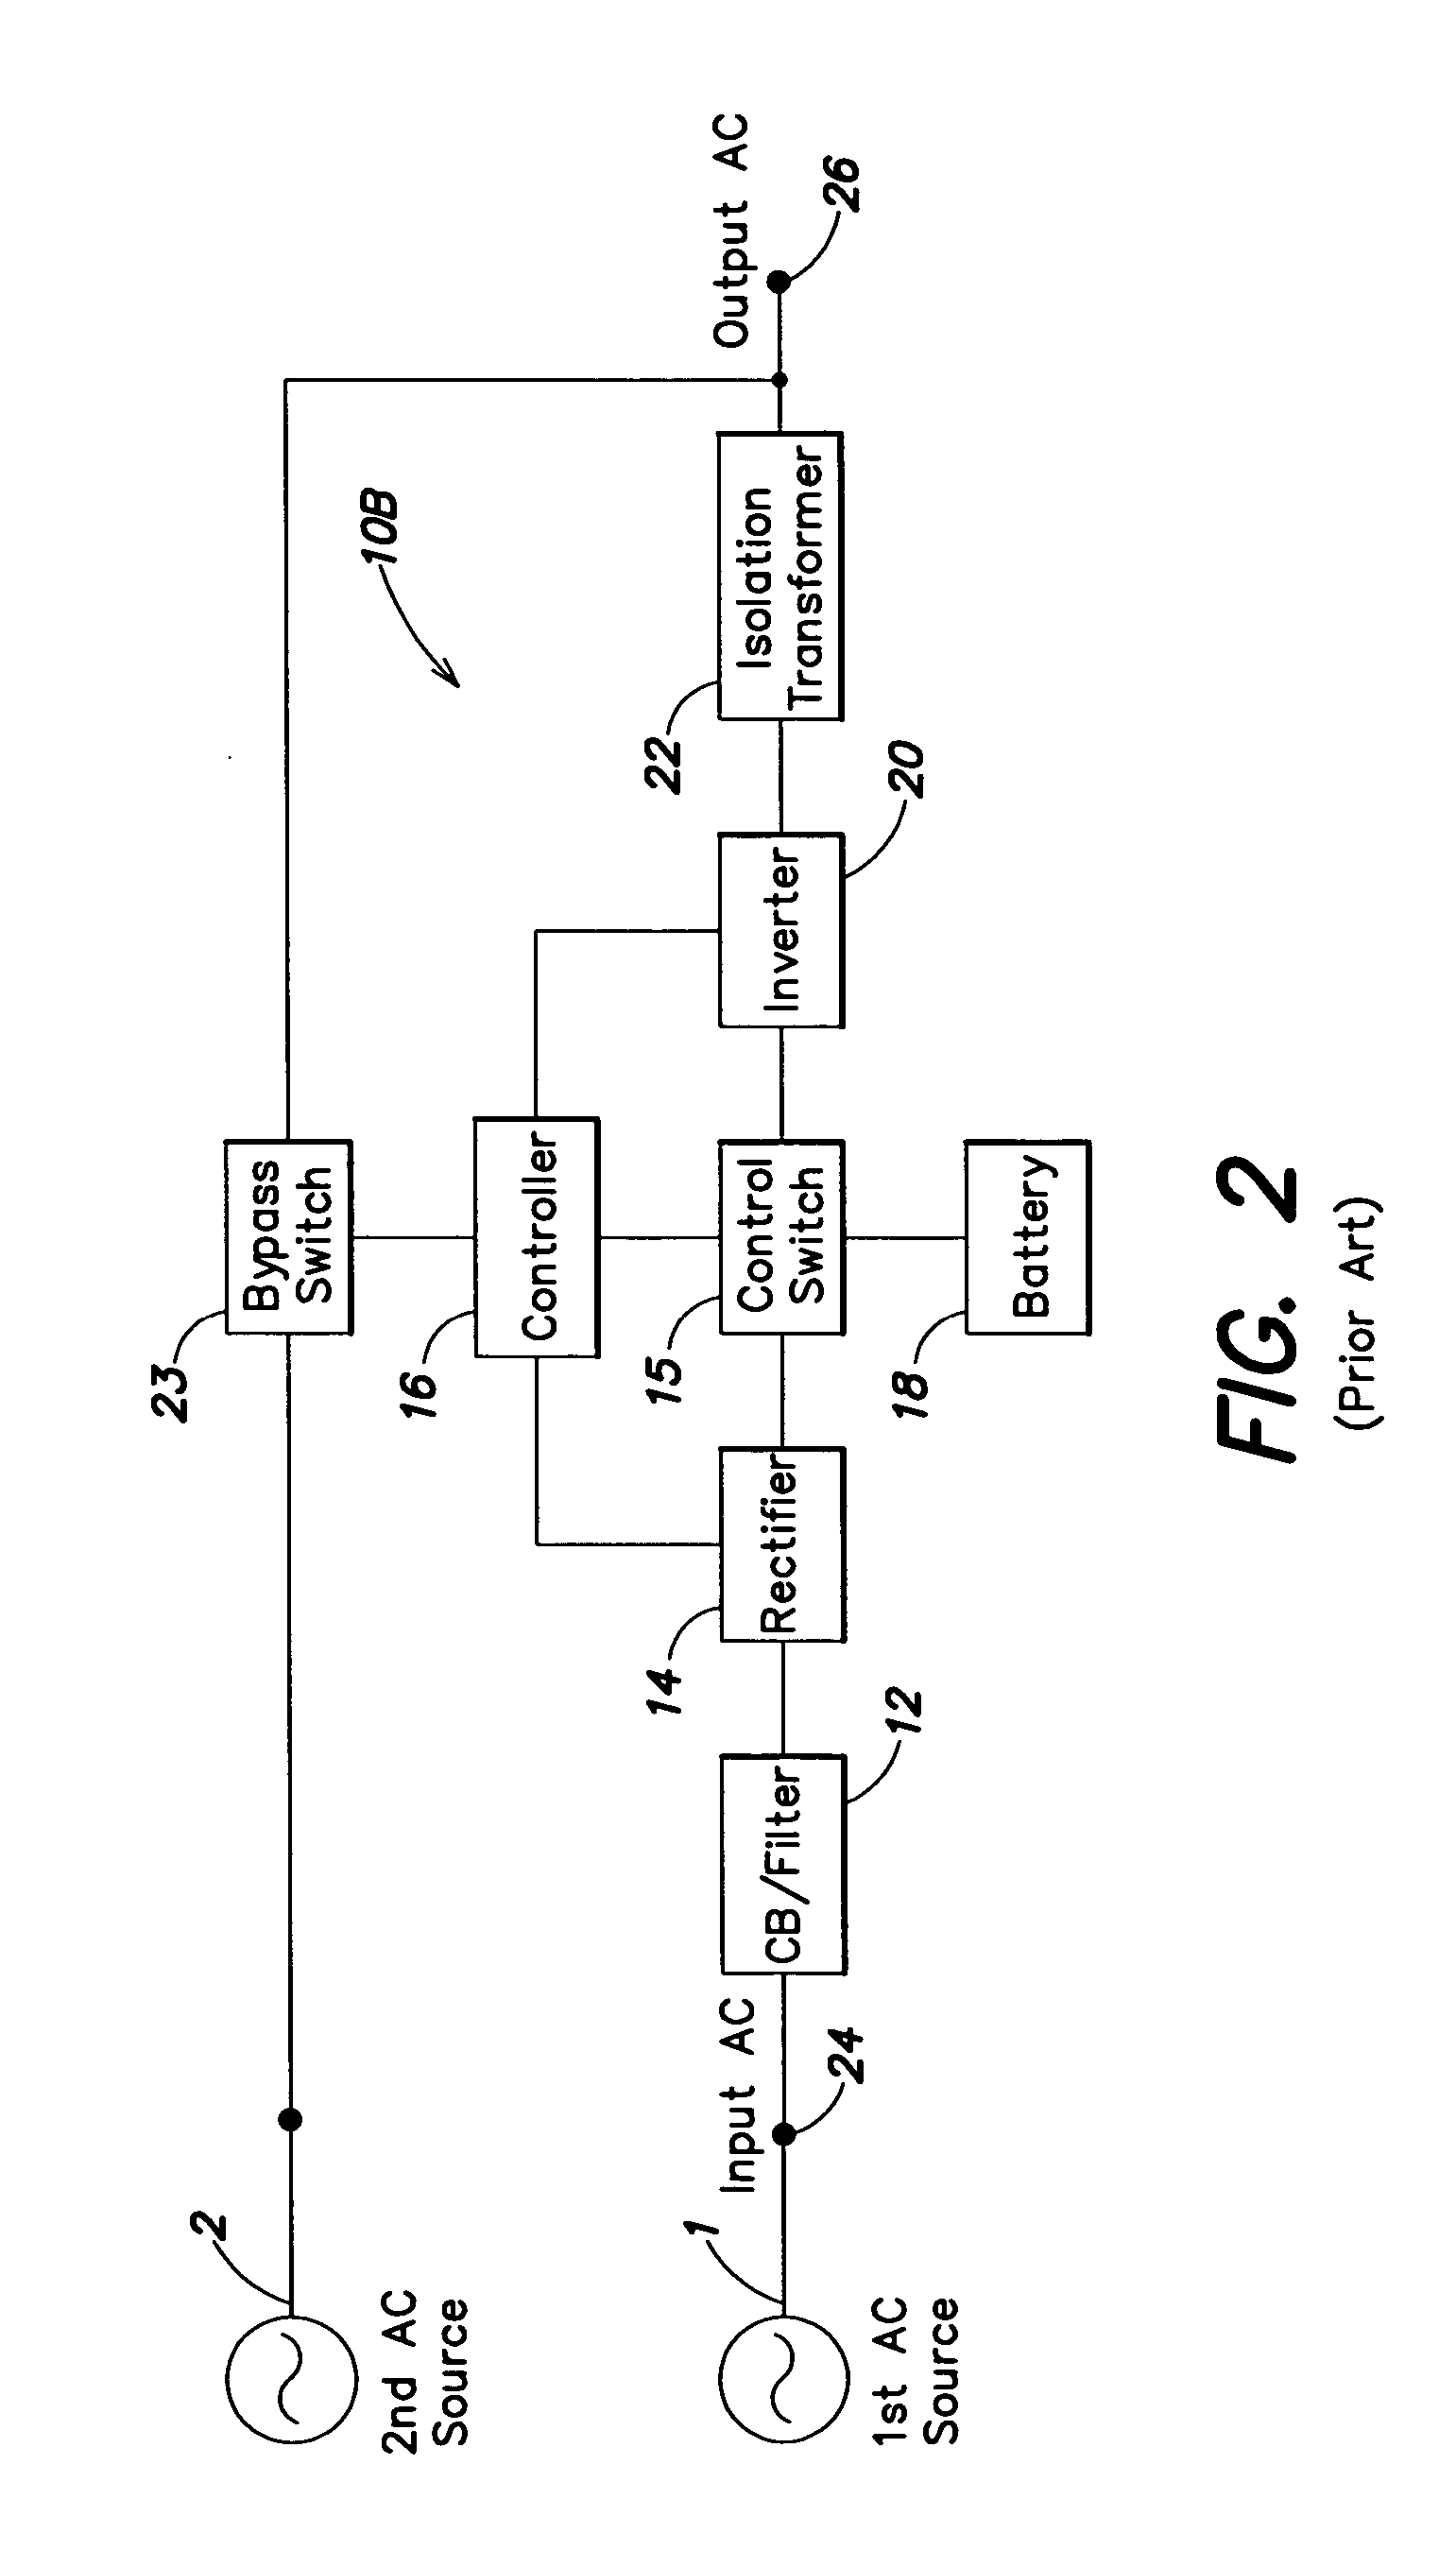 Method and apparatus for providing uninterruptible power